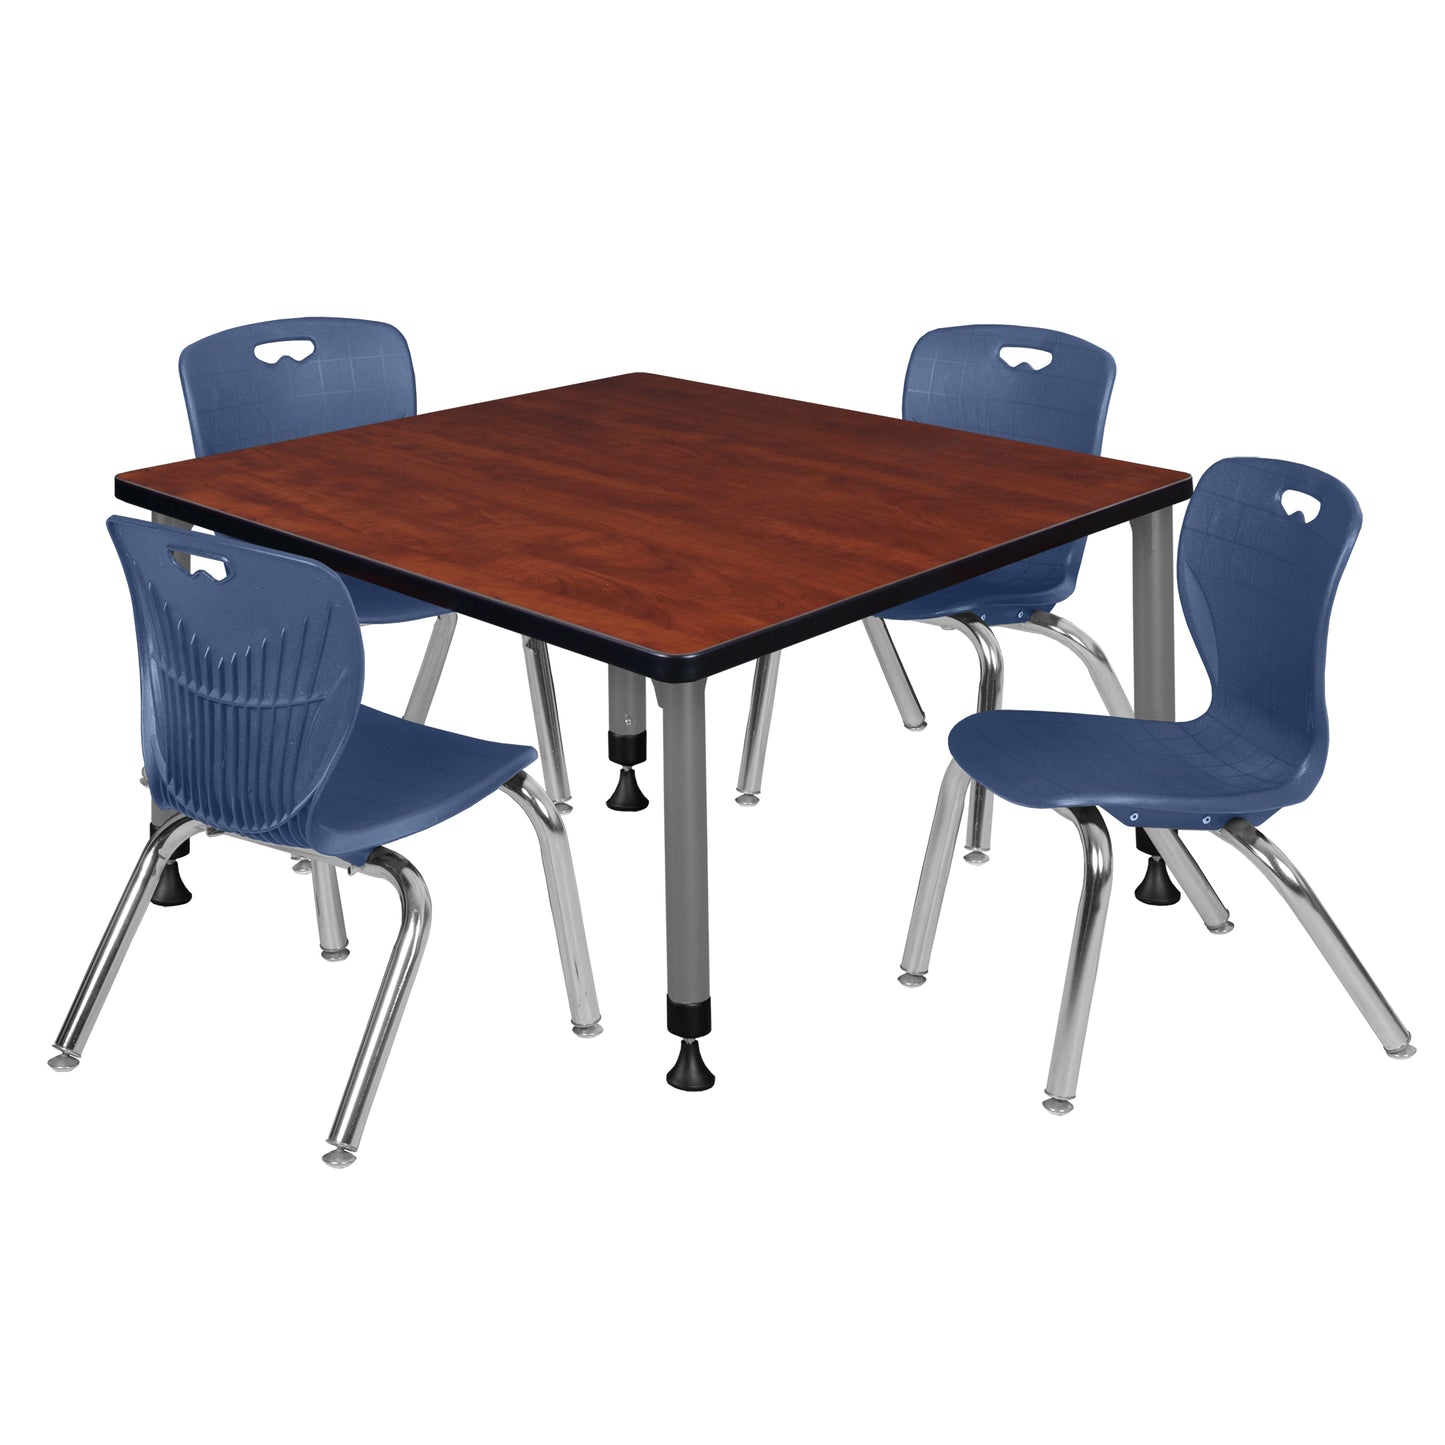 Regency Kee 42 in. Square Adjustable Classroom Table & 4 Andy 12 in. Stack Chairs